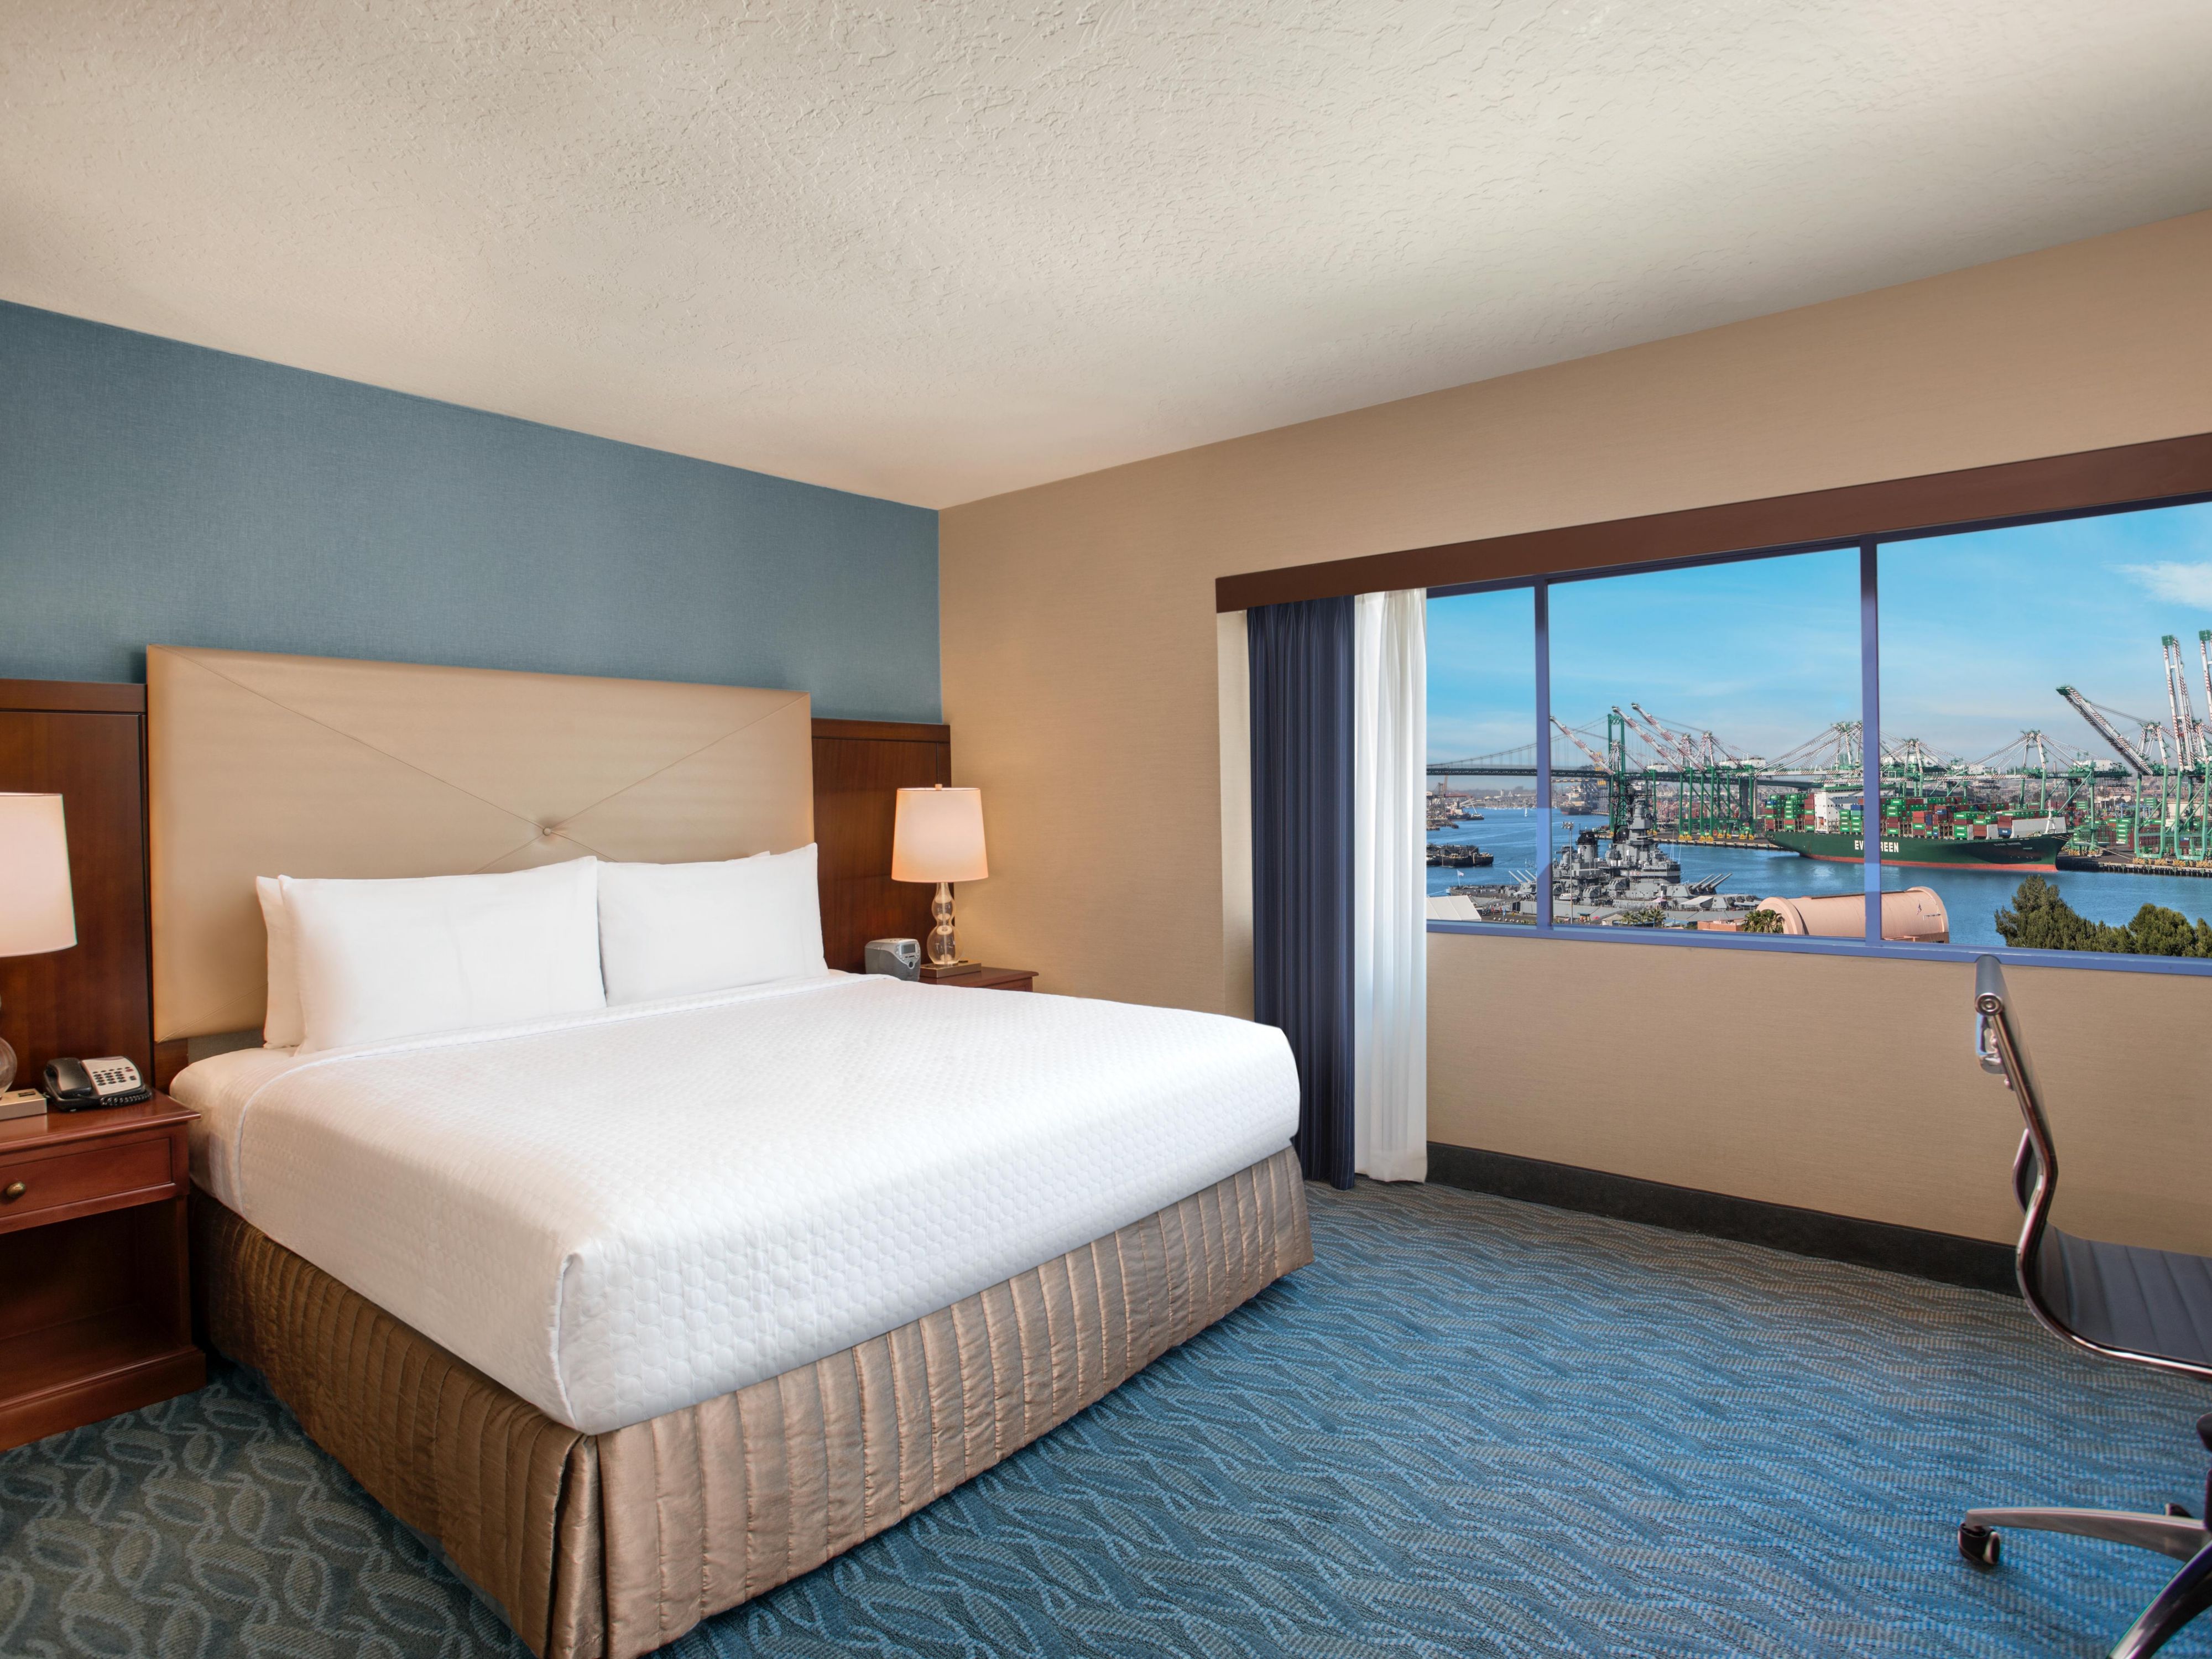 Relax in your room with overlooking Los Angeles Harbor.